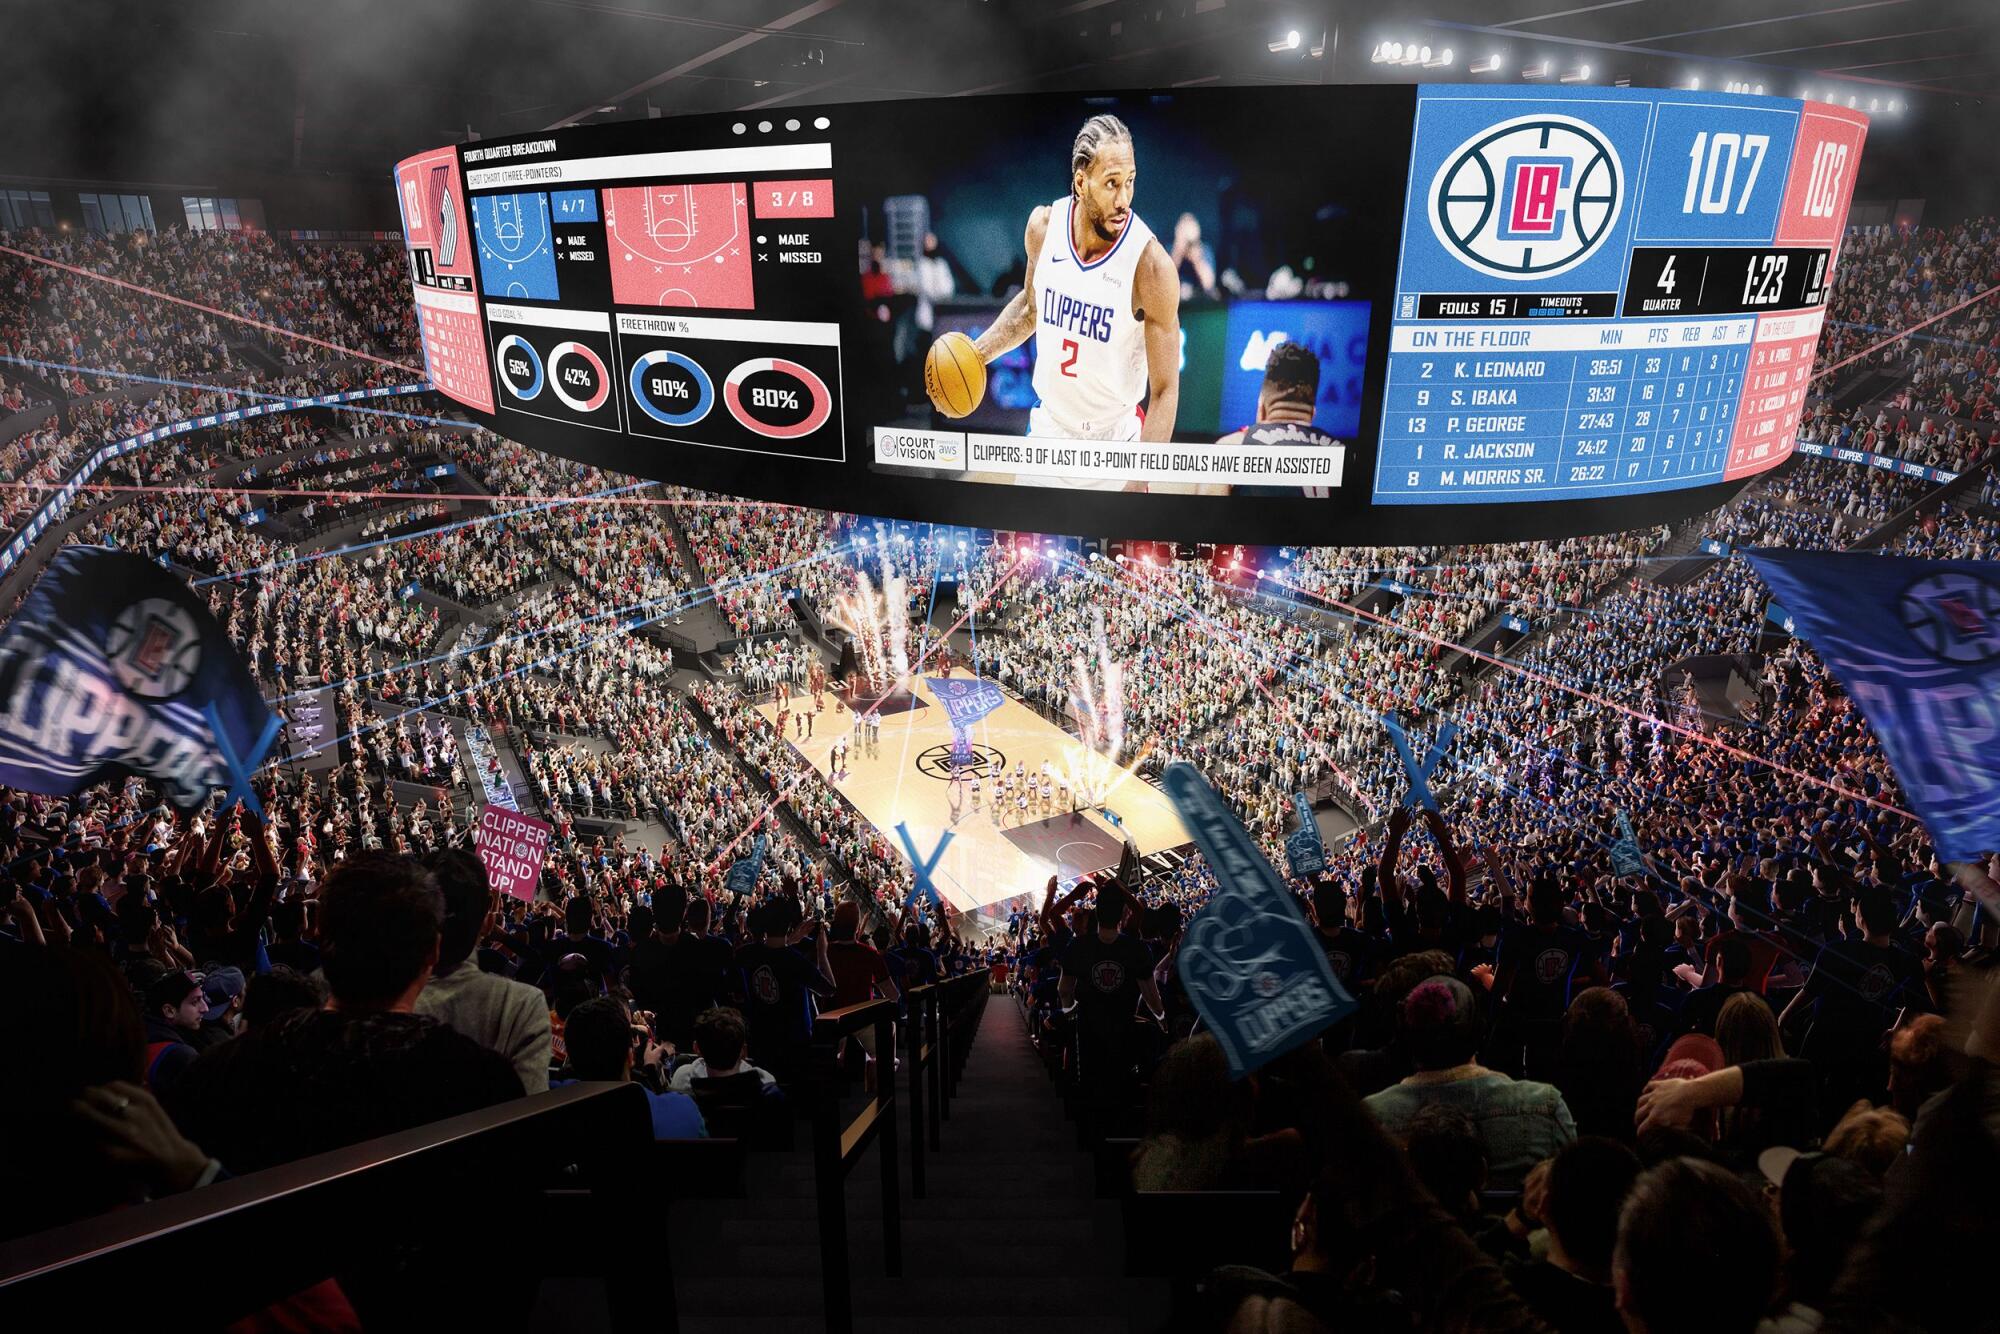 The Intuit Dome's scoreboard will be a two-sided oval, with 44,000 square feet of LED lights.